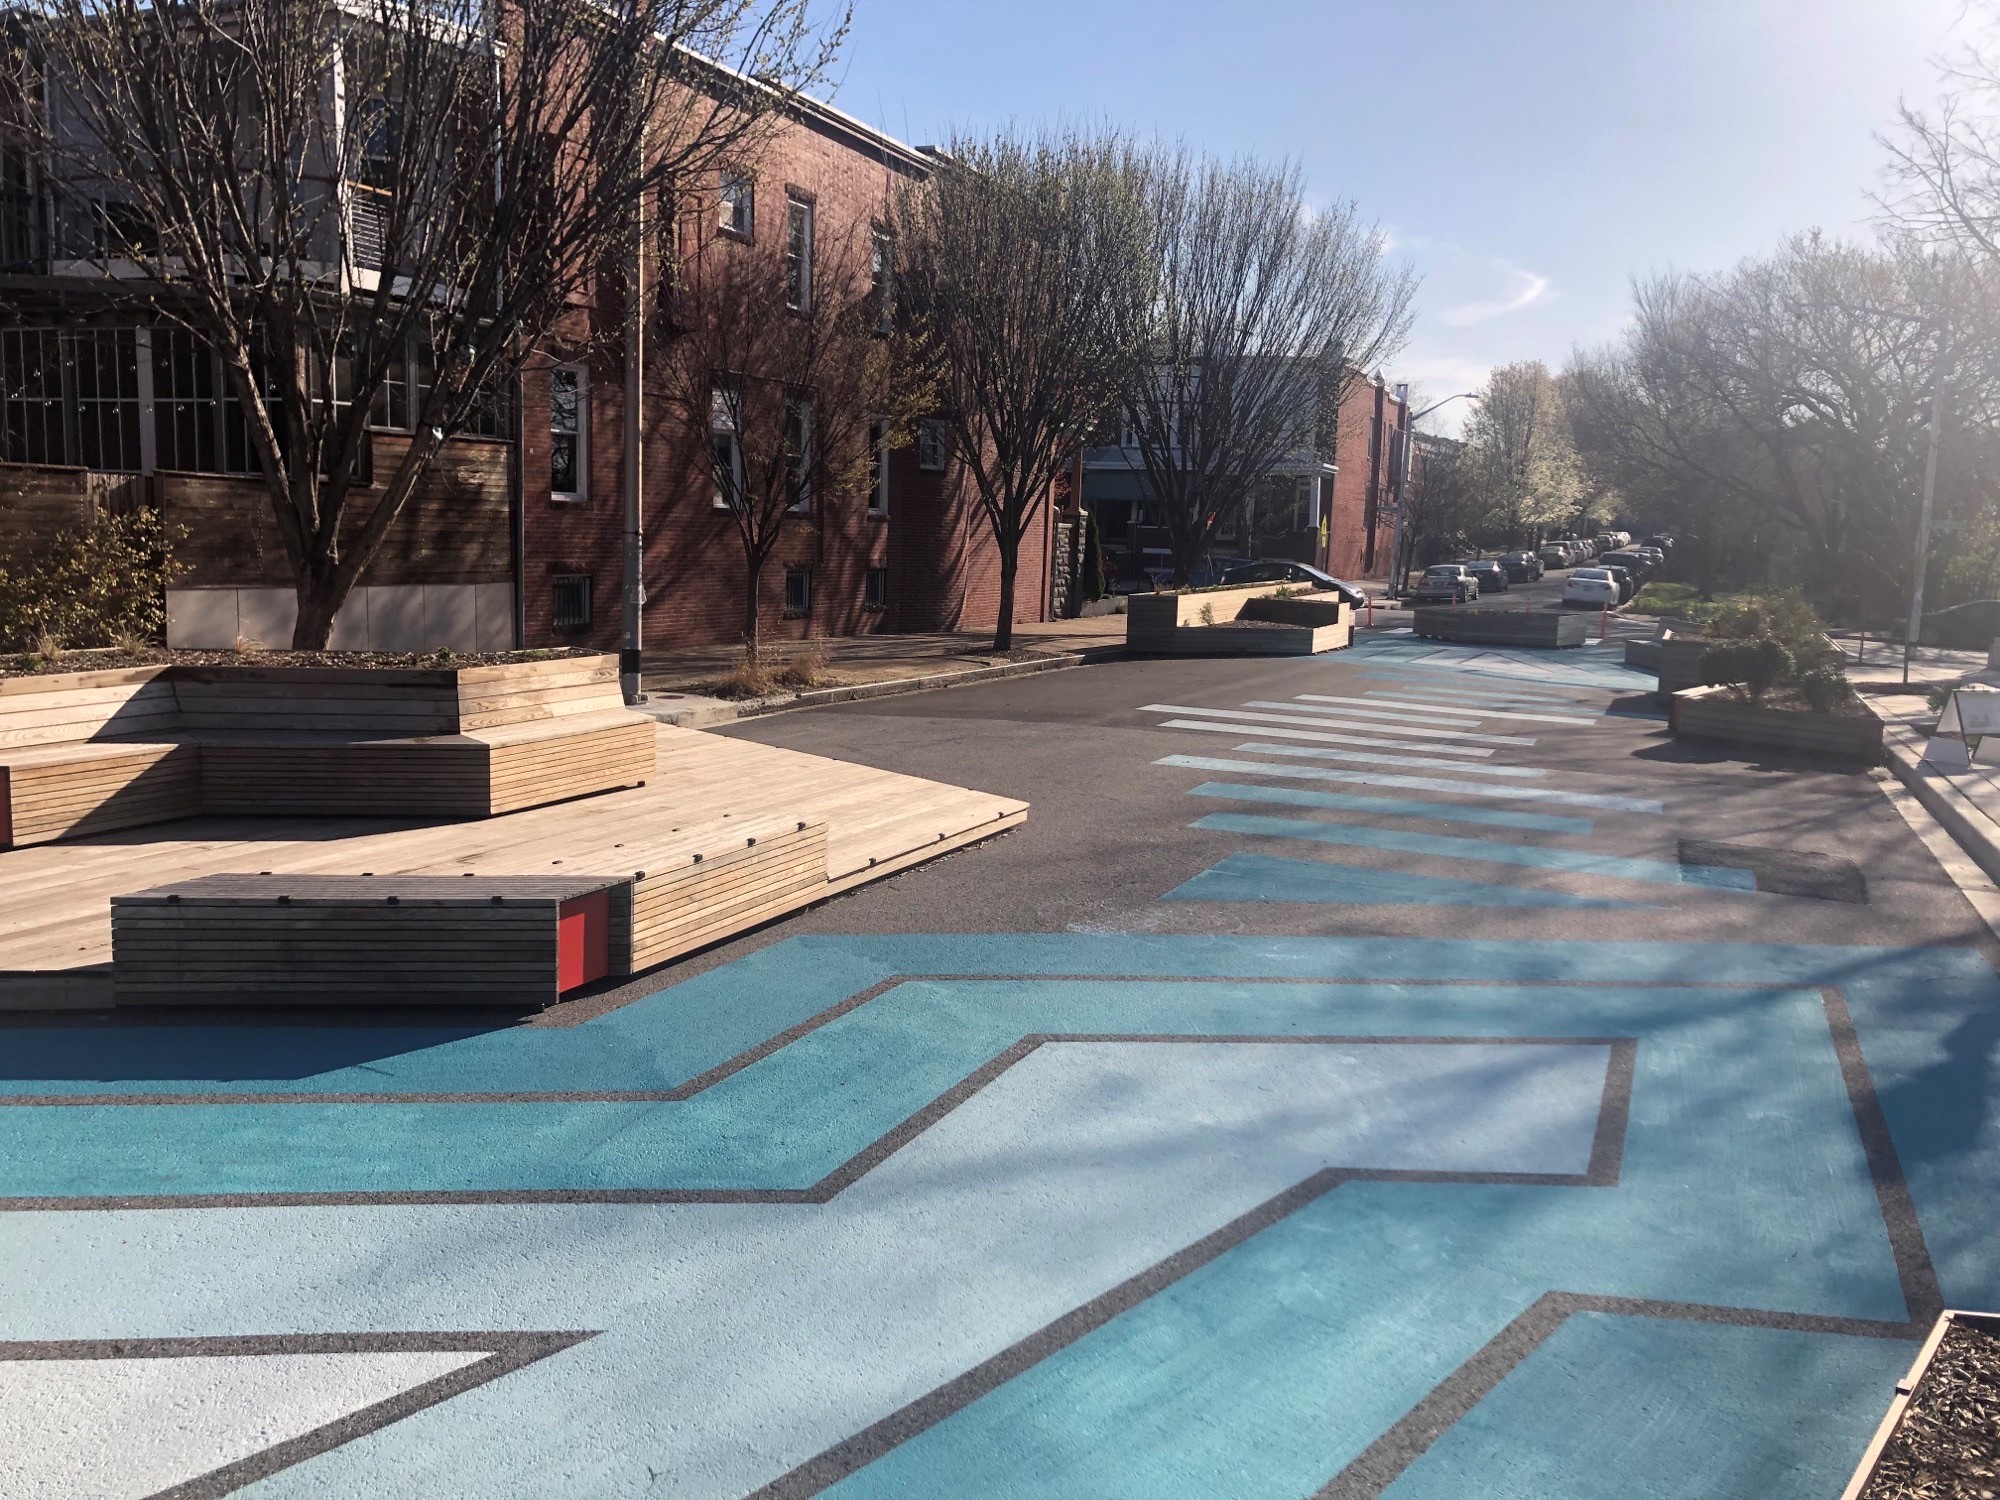 Painted plaza transforming a city street into a vibrant community space.